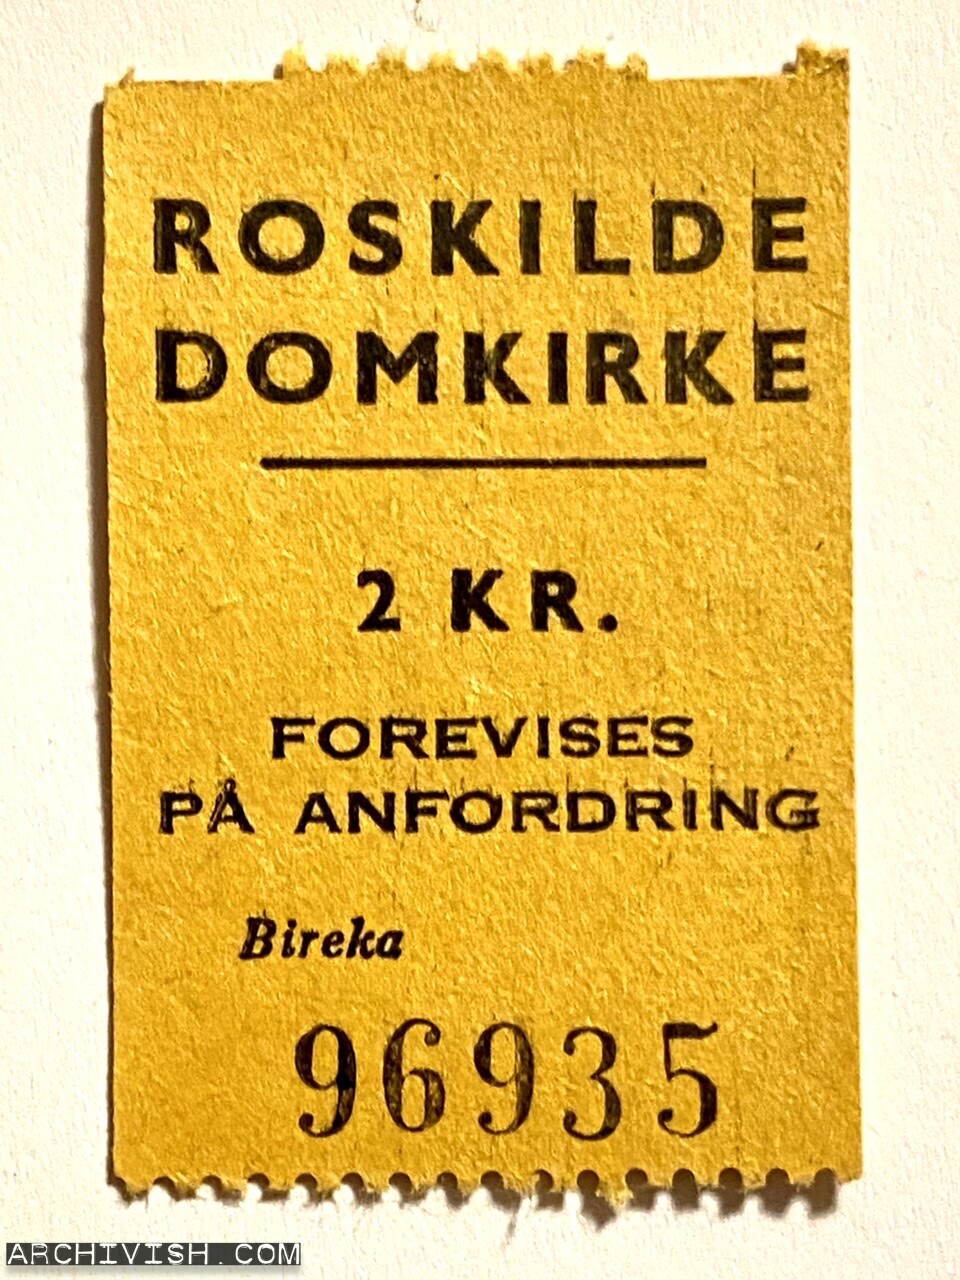 Bireka ticket from the Danish cathedral "Roskilde Domkirke" 1960s